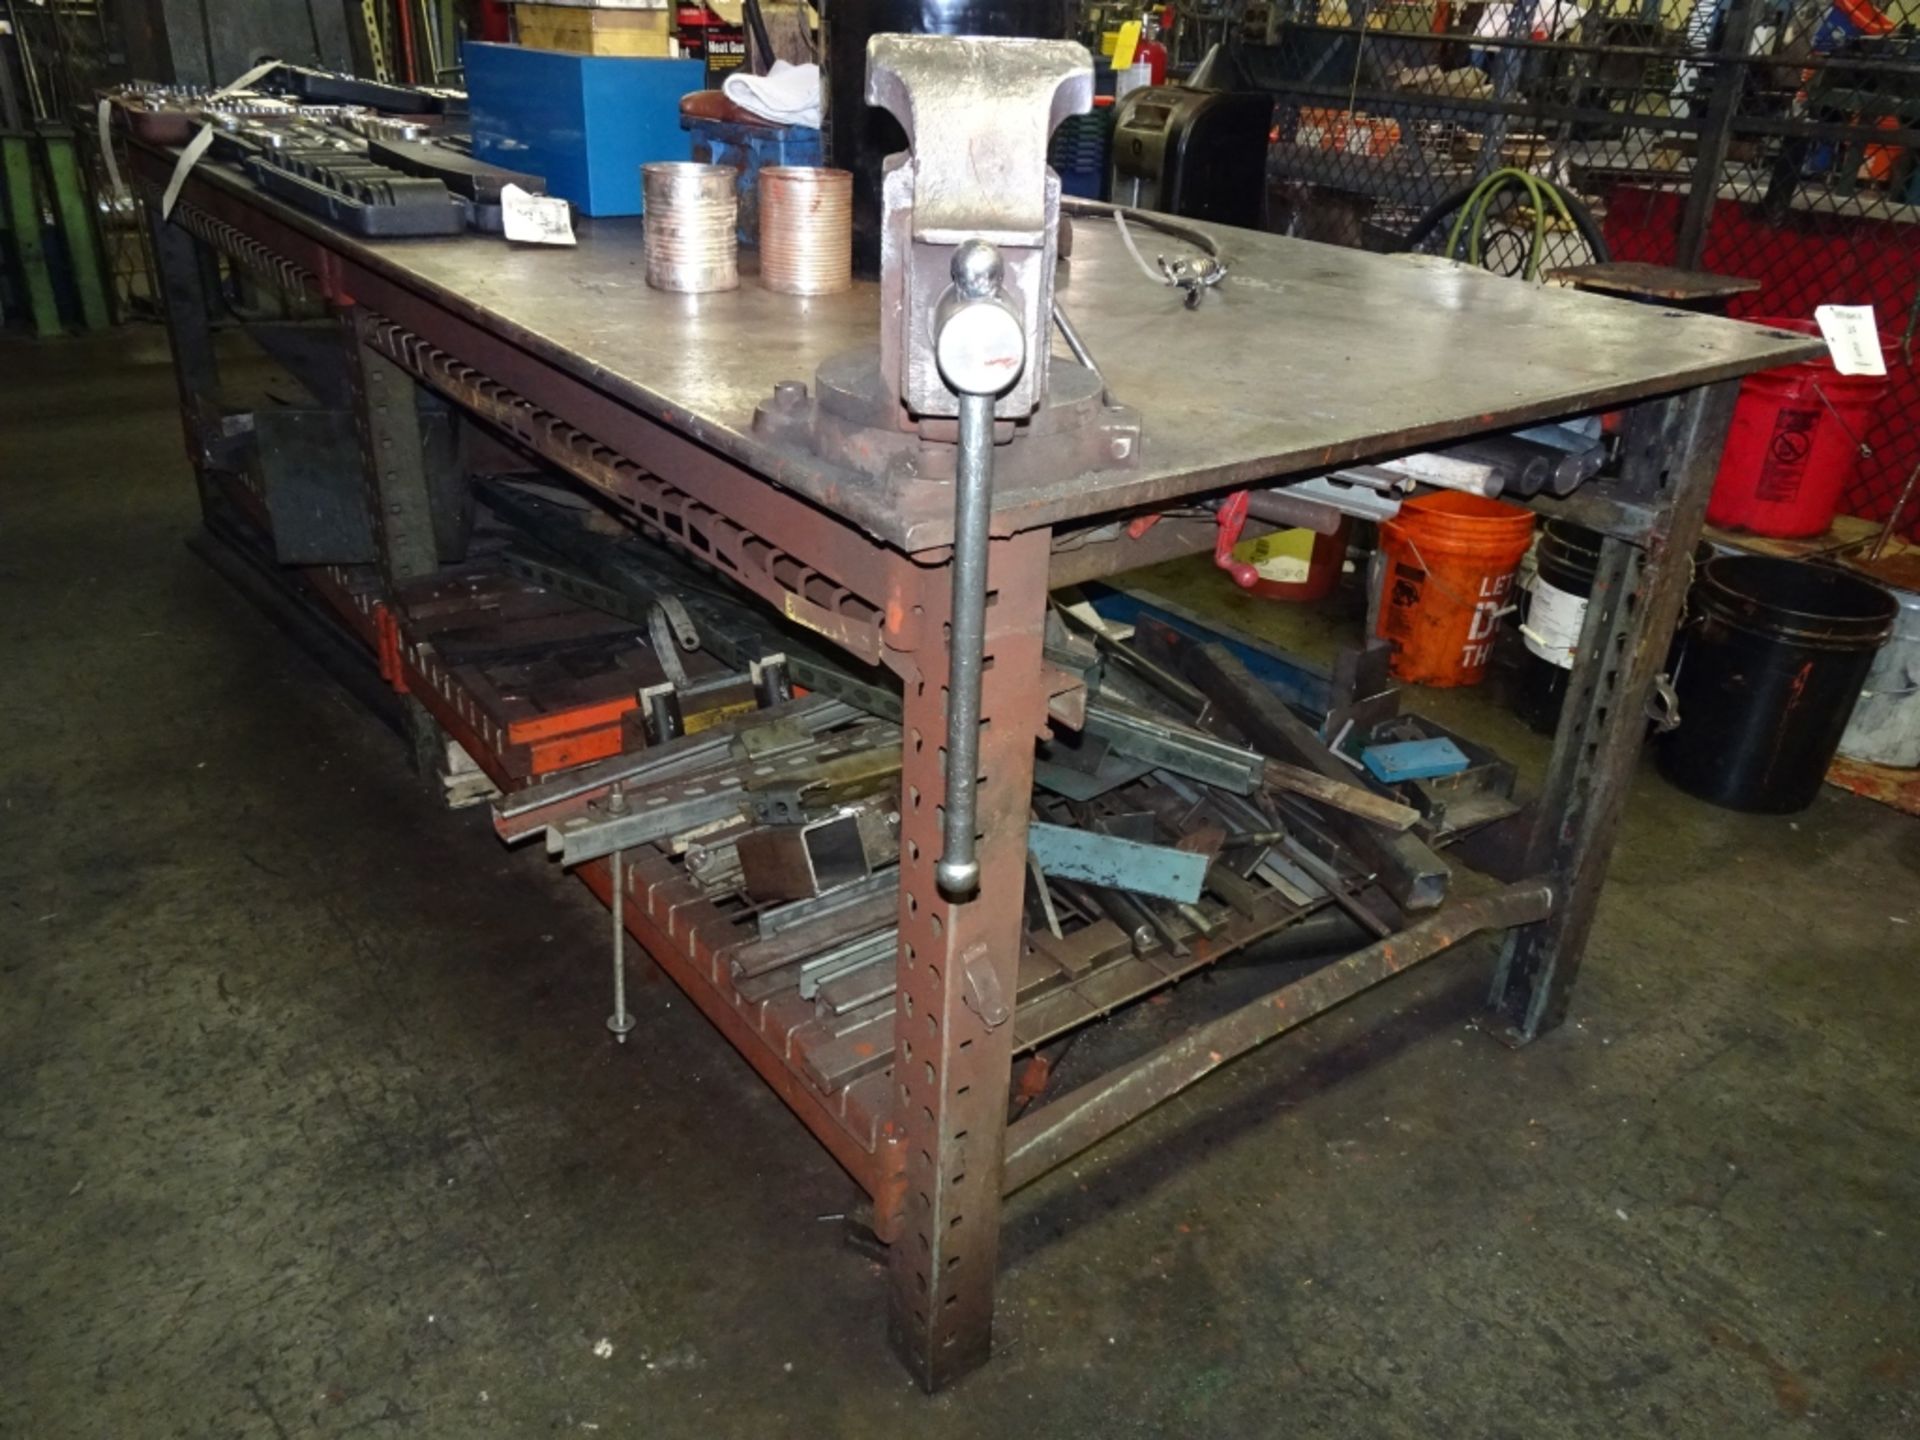 10' x 4' Custom Fabricated Welding Table w/ Vise and Misc Metals - Image 2 of 6